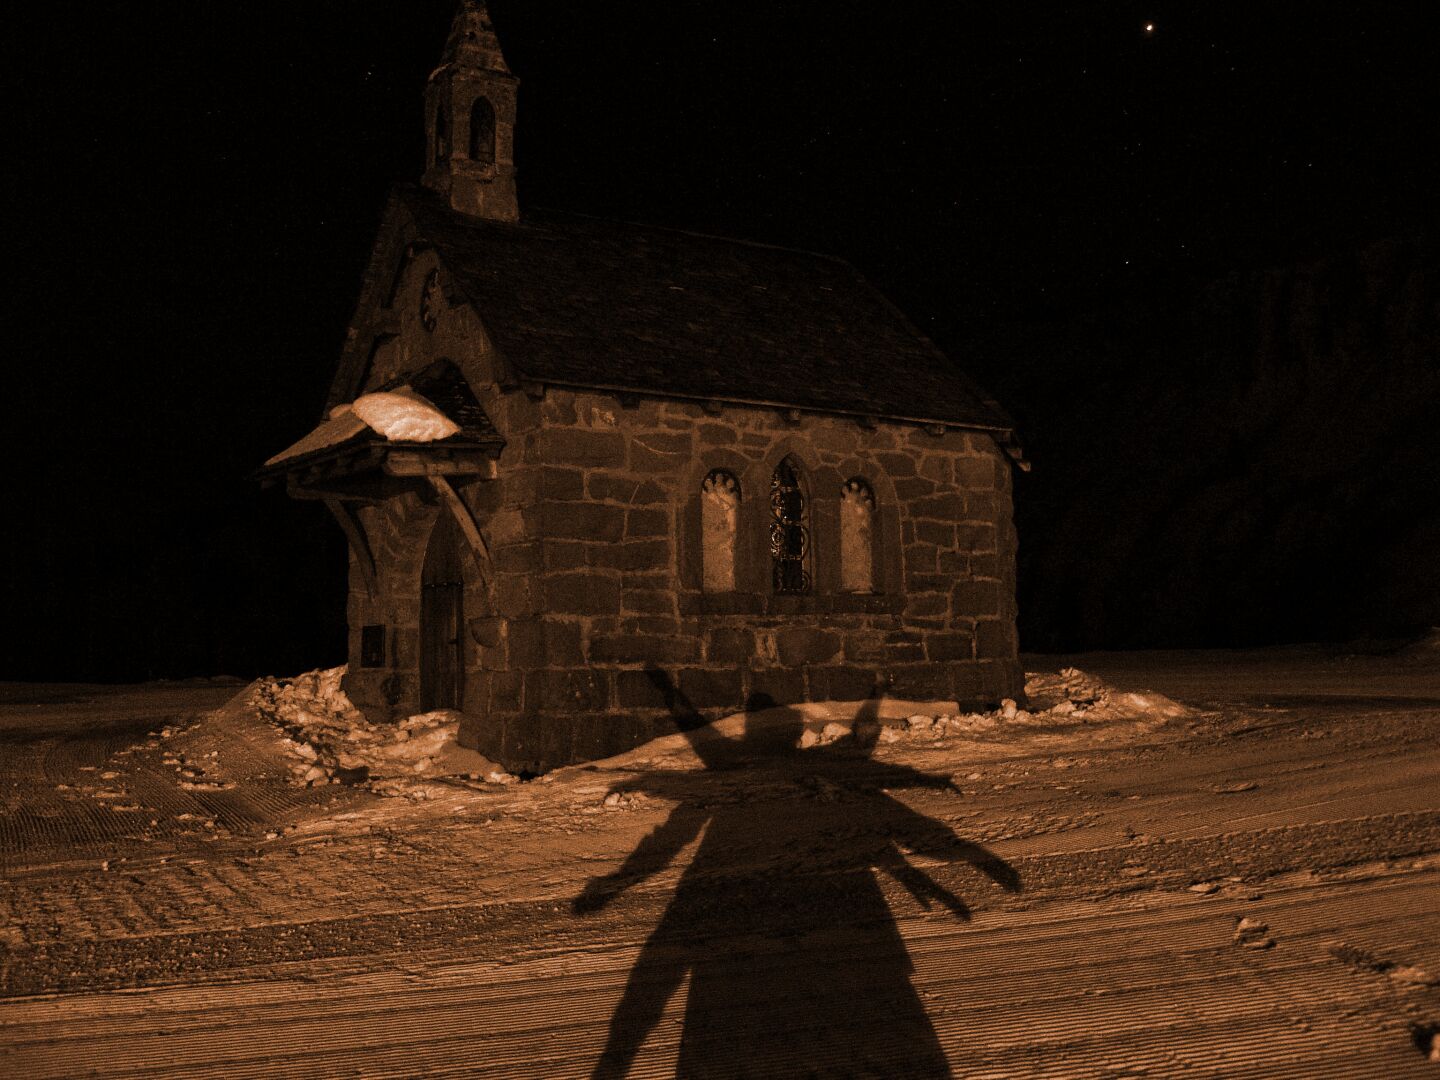 The small chapel at the end of the village definitely looks more intriguing at night-time.